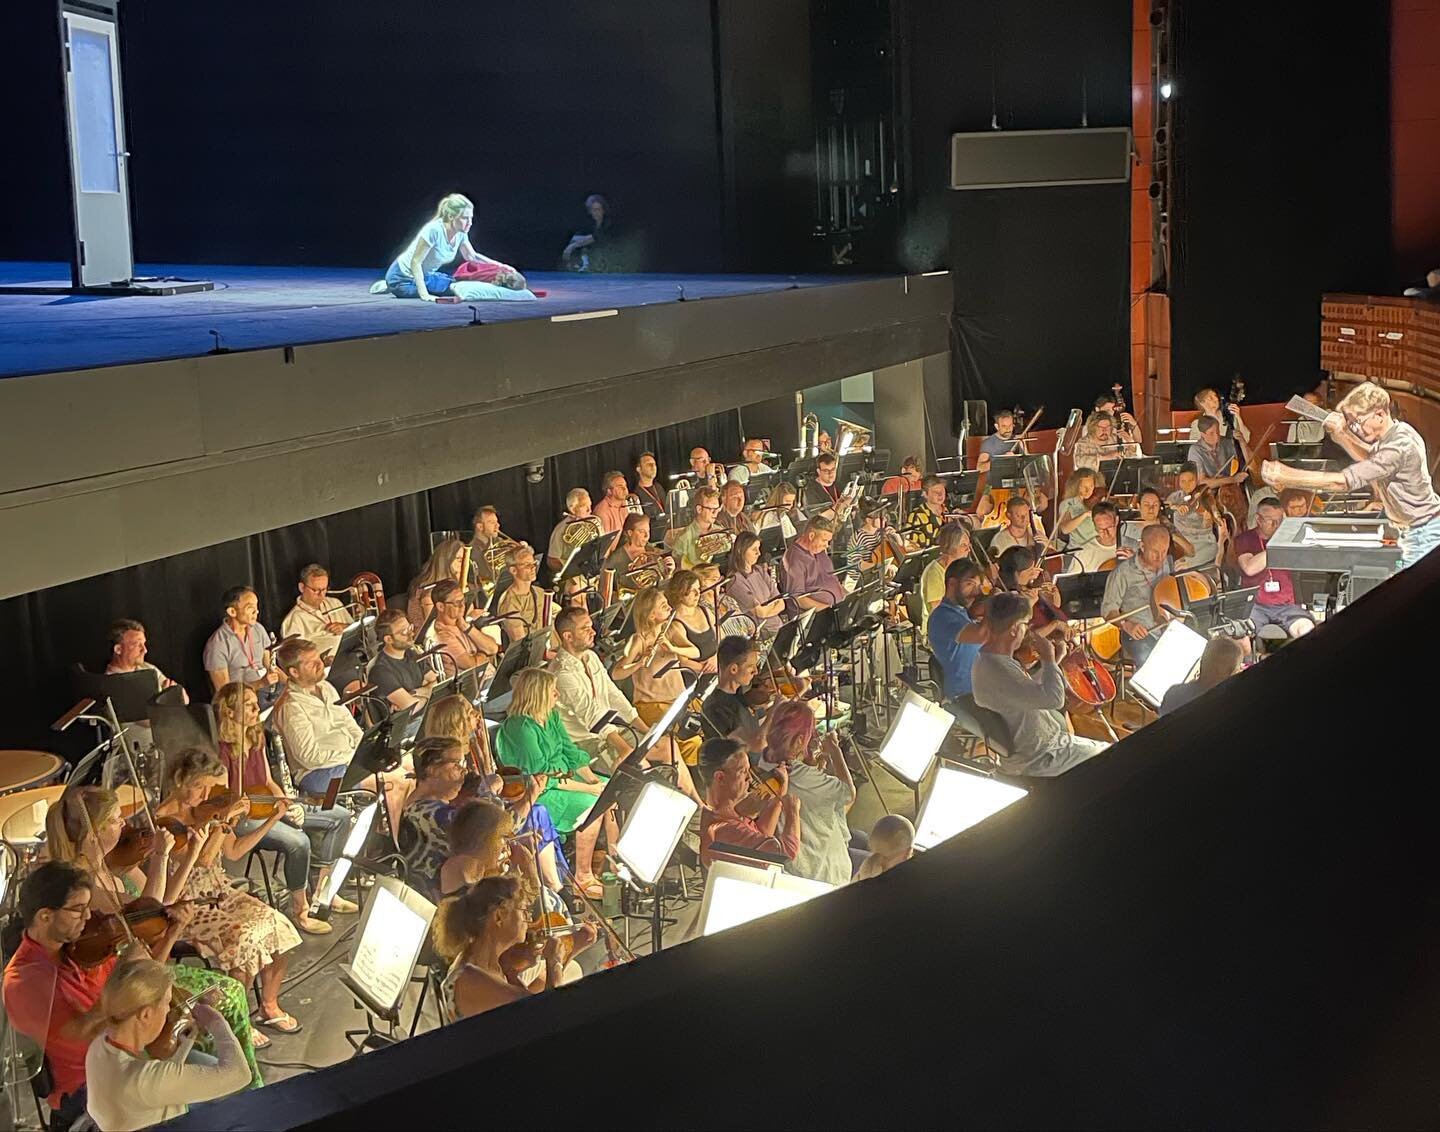 In the course of staging our Wozzeck, I ended up playing the onstage piano part and conducting the bandas both on and off stage. And it was a thrill to conduct the London Symphony Orchestra in rehearsal so Sir Simon could listen from the perspective 